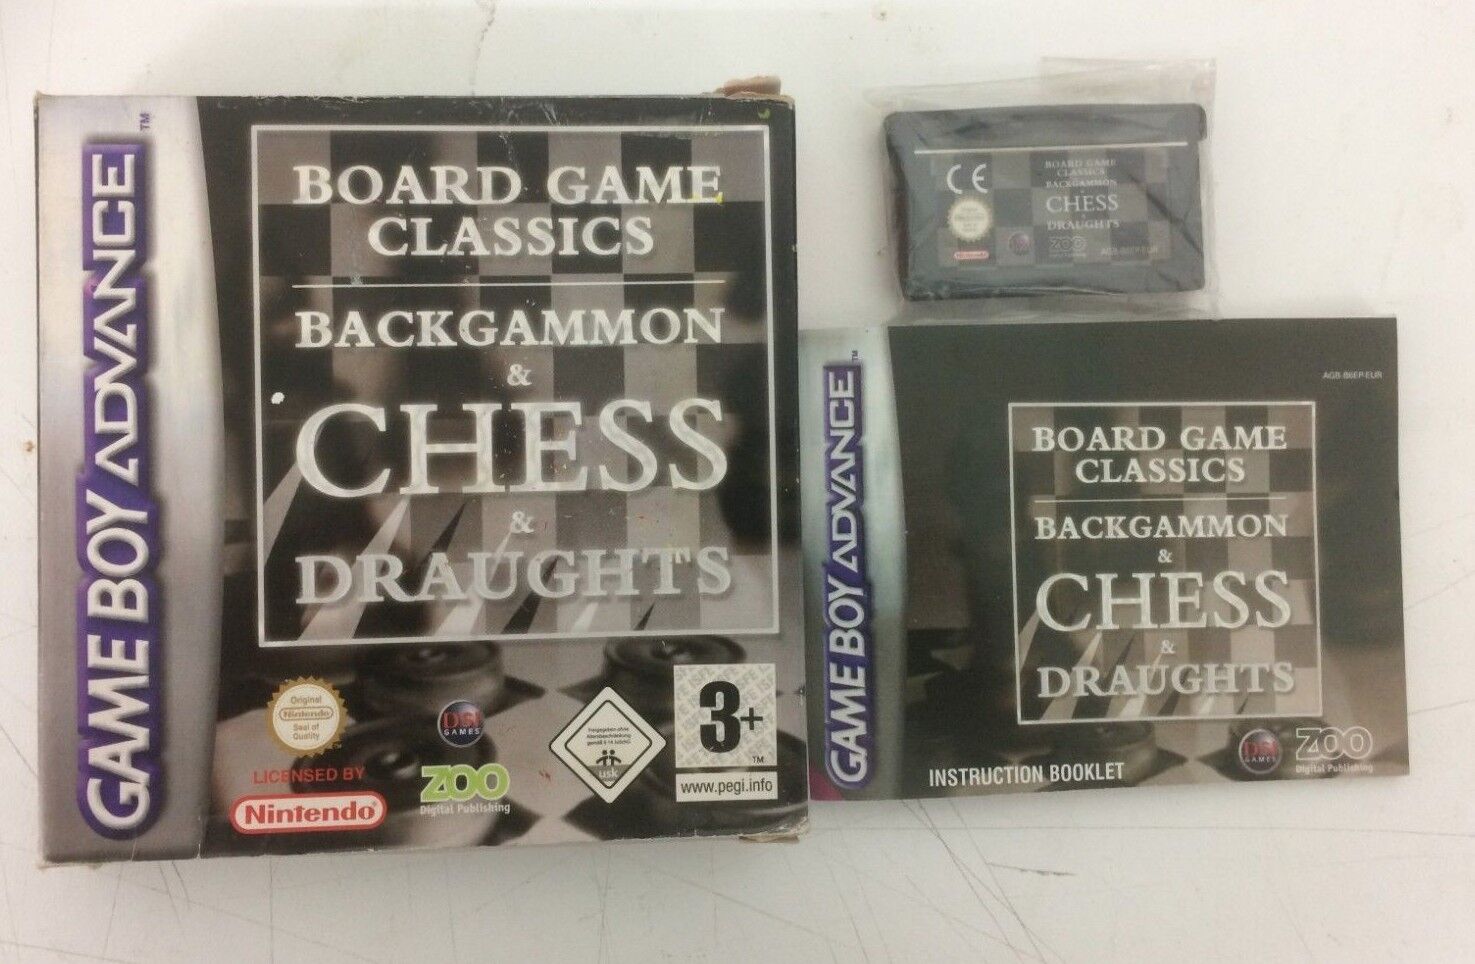 Board Game Classics Backgammon et Chess et Draughts Game Boy Advance